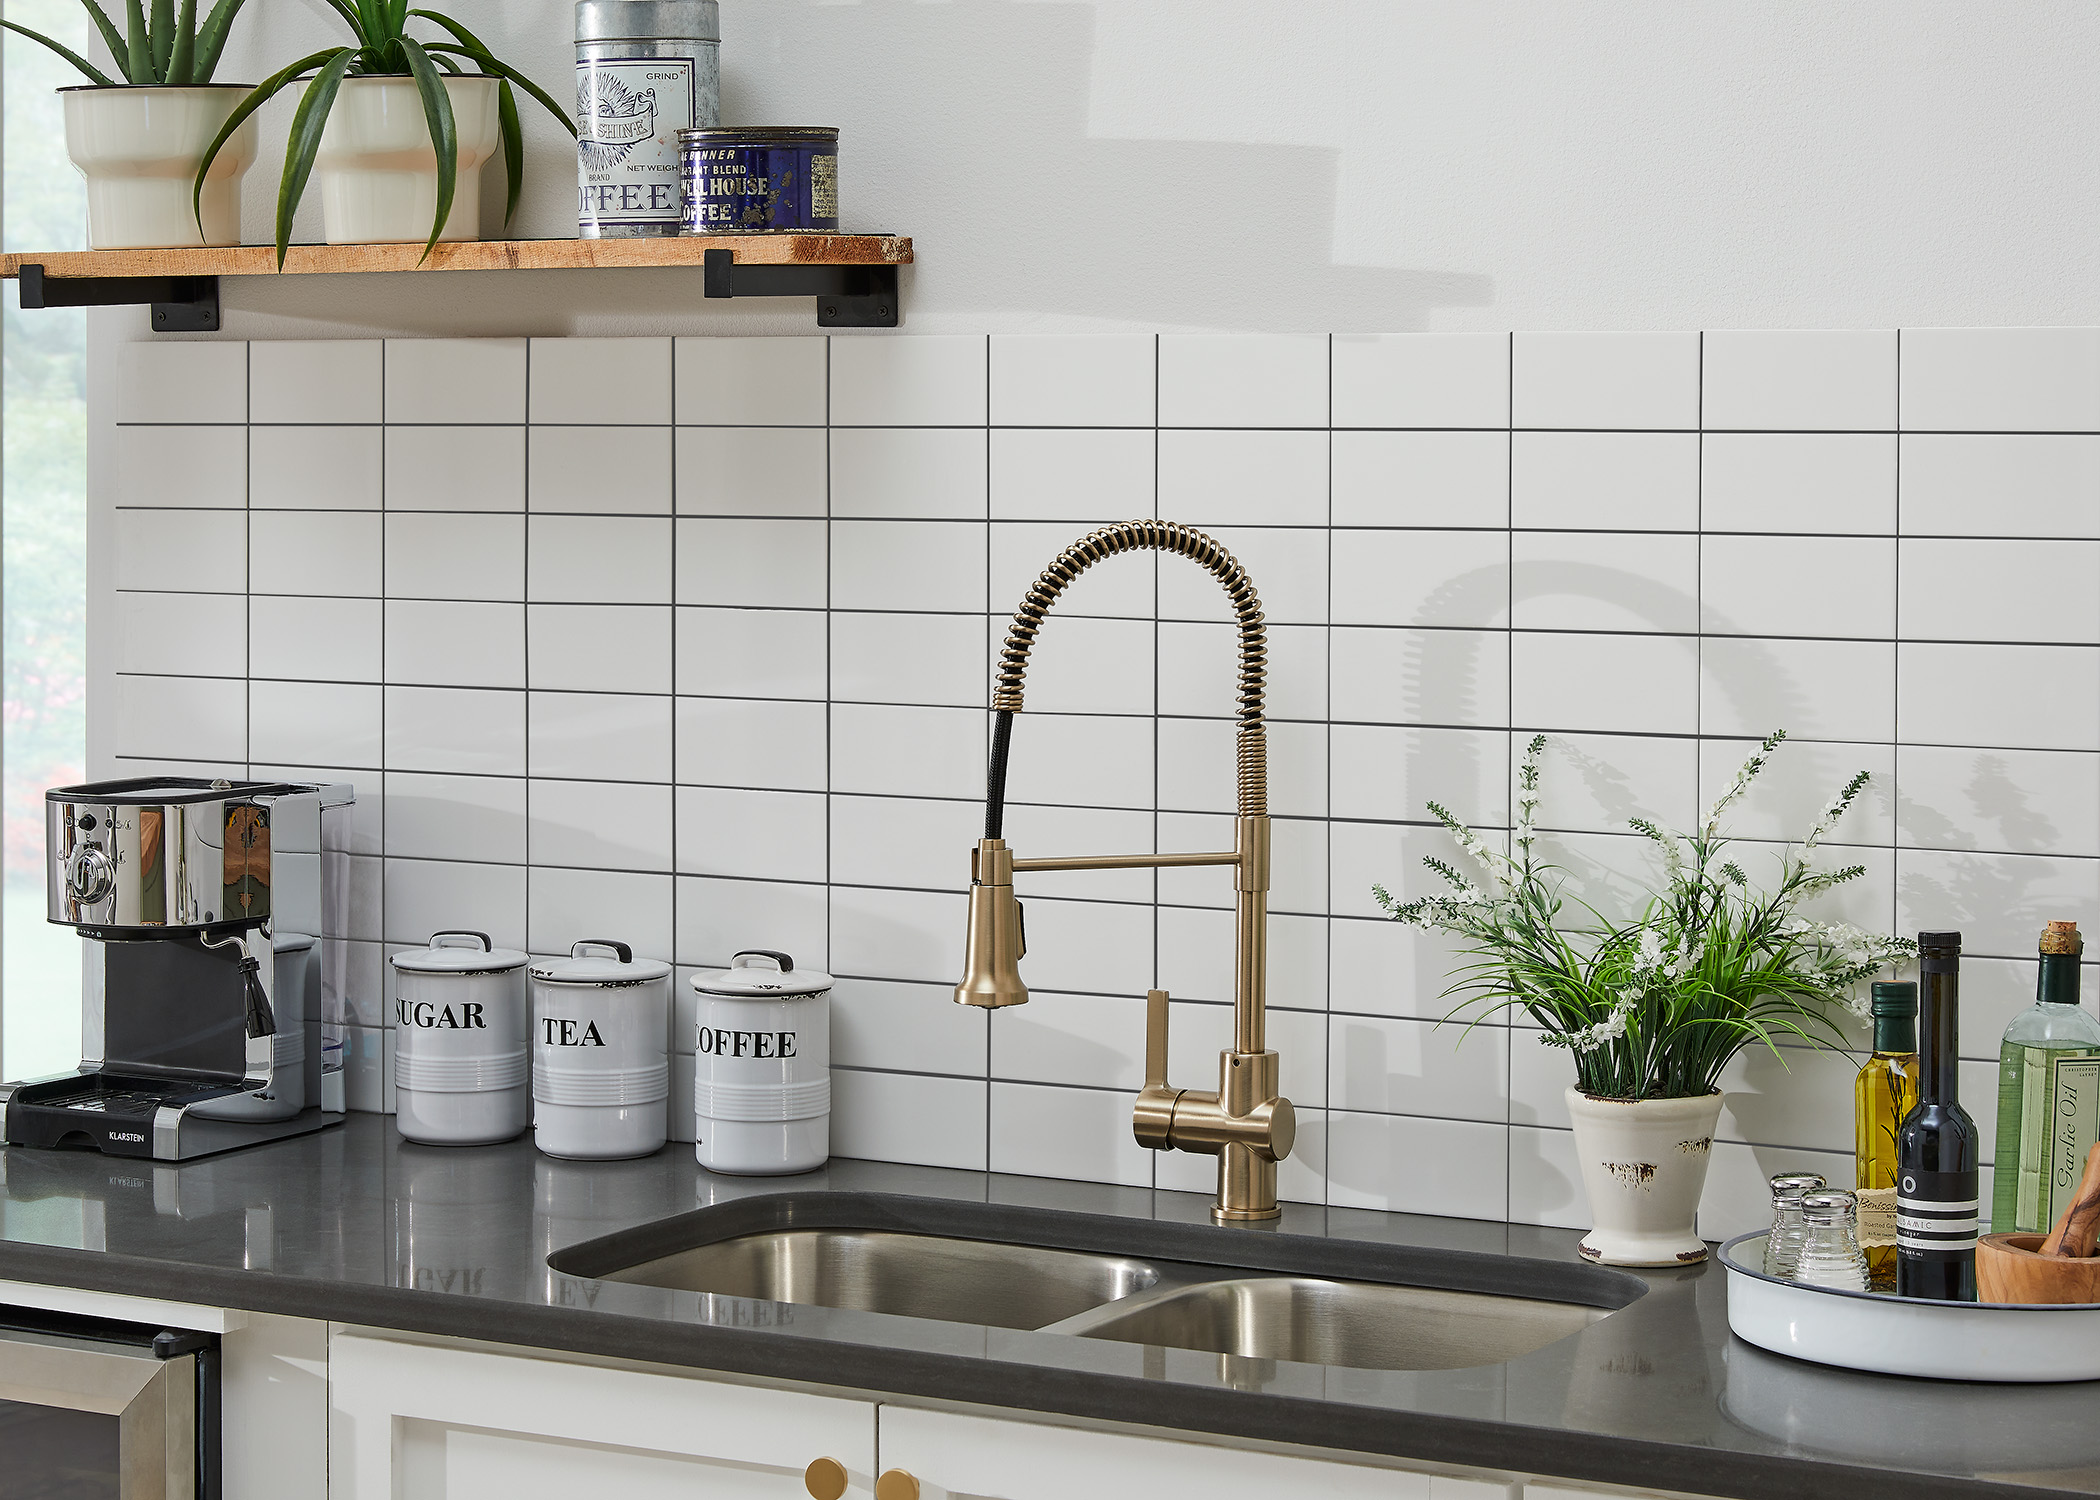 white subway tile in kitchen with brass faucet and dark granite countertops